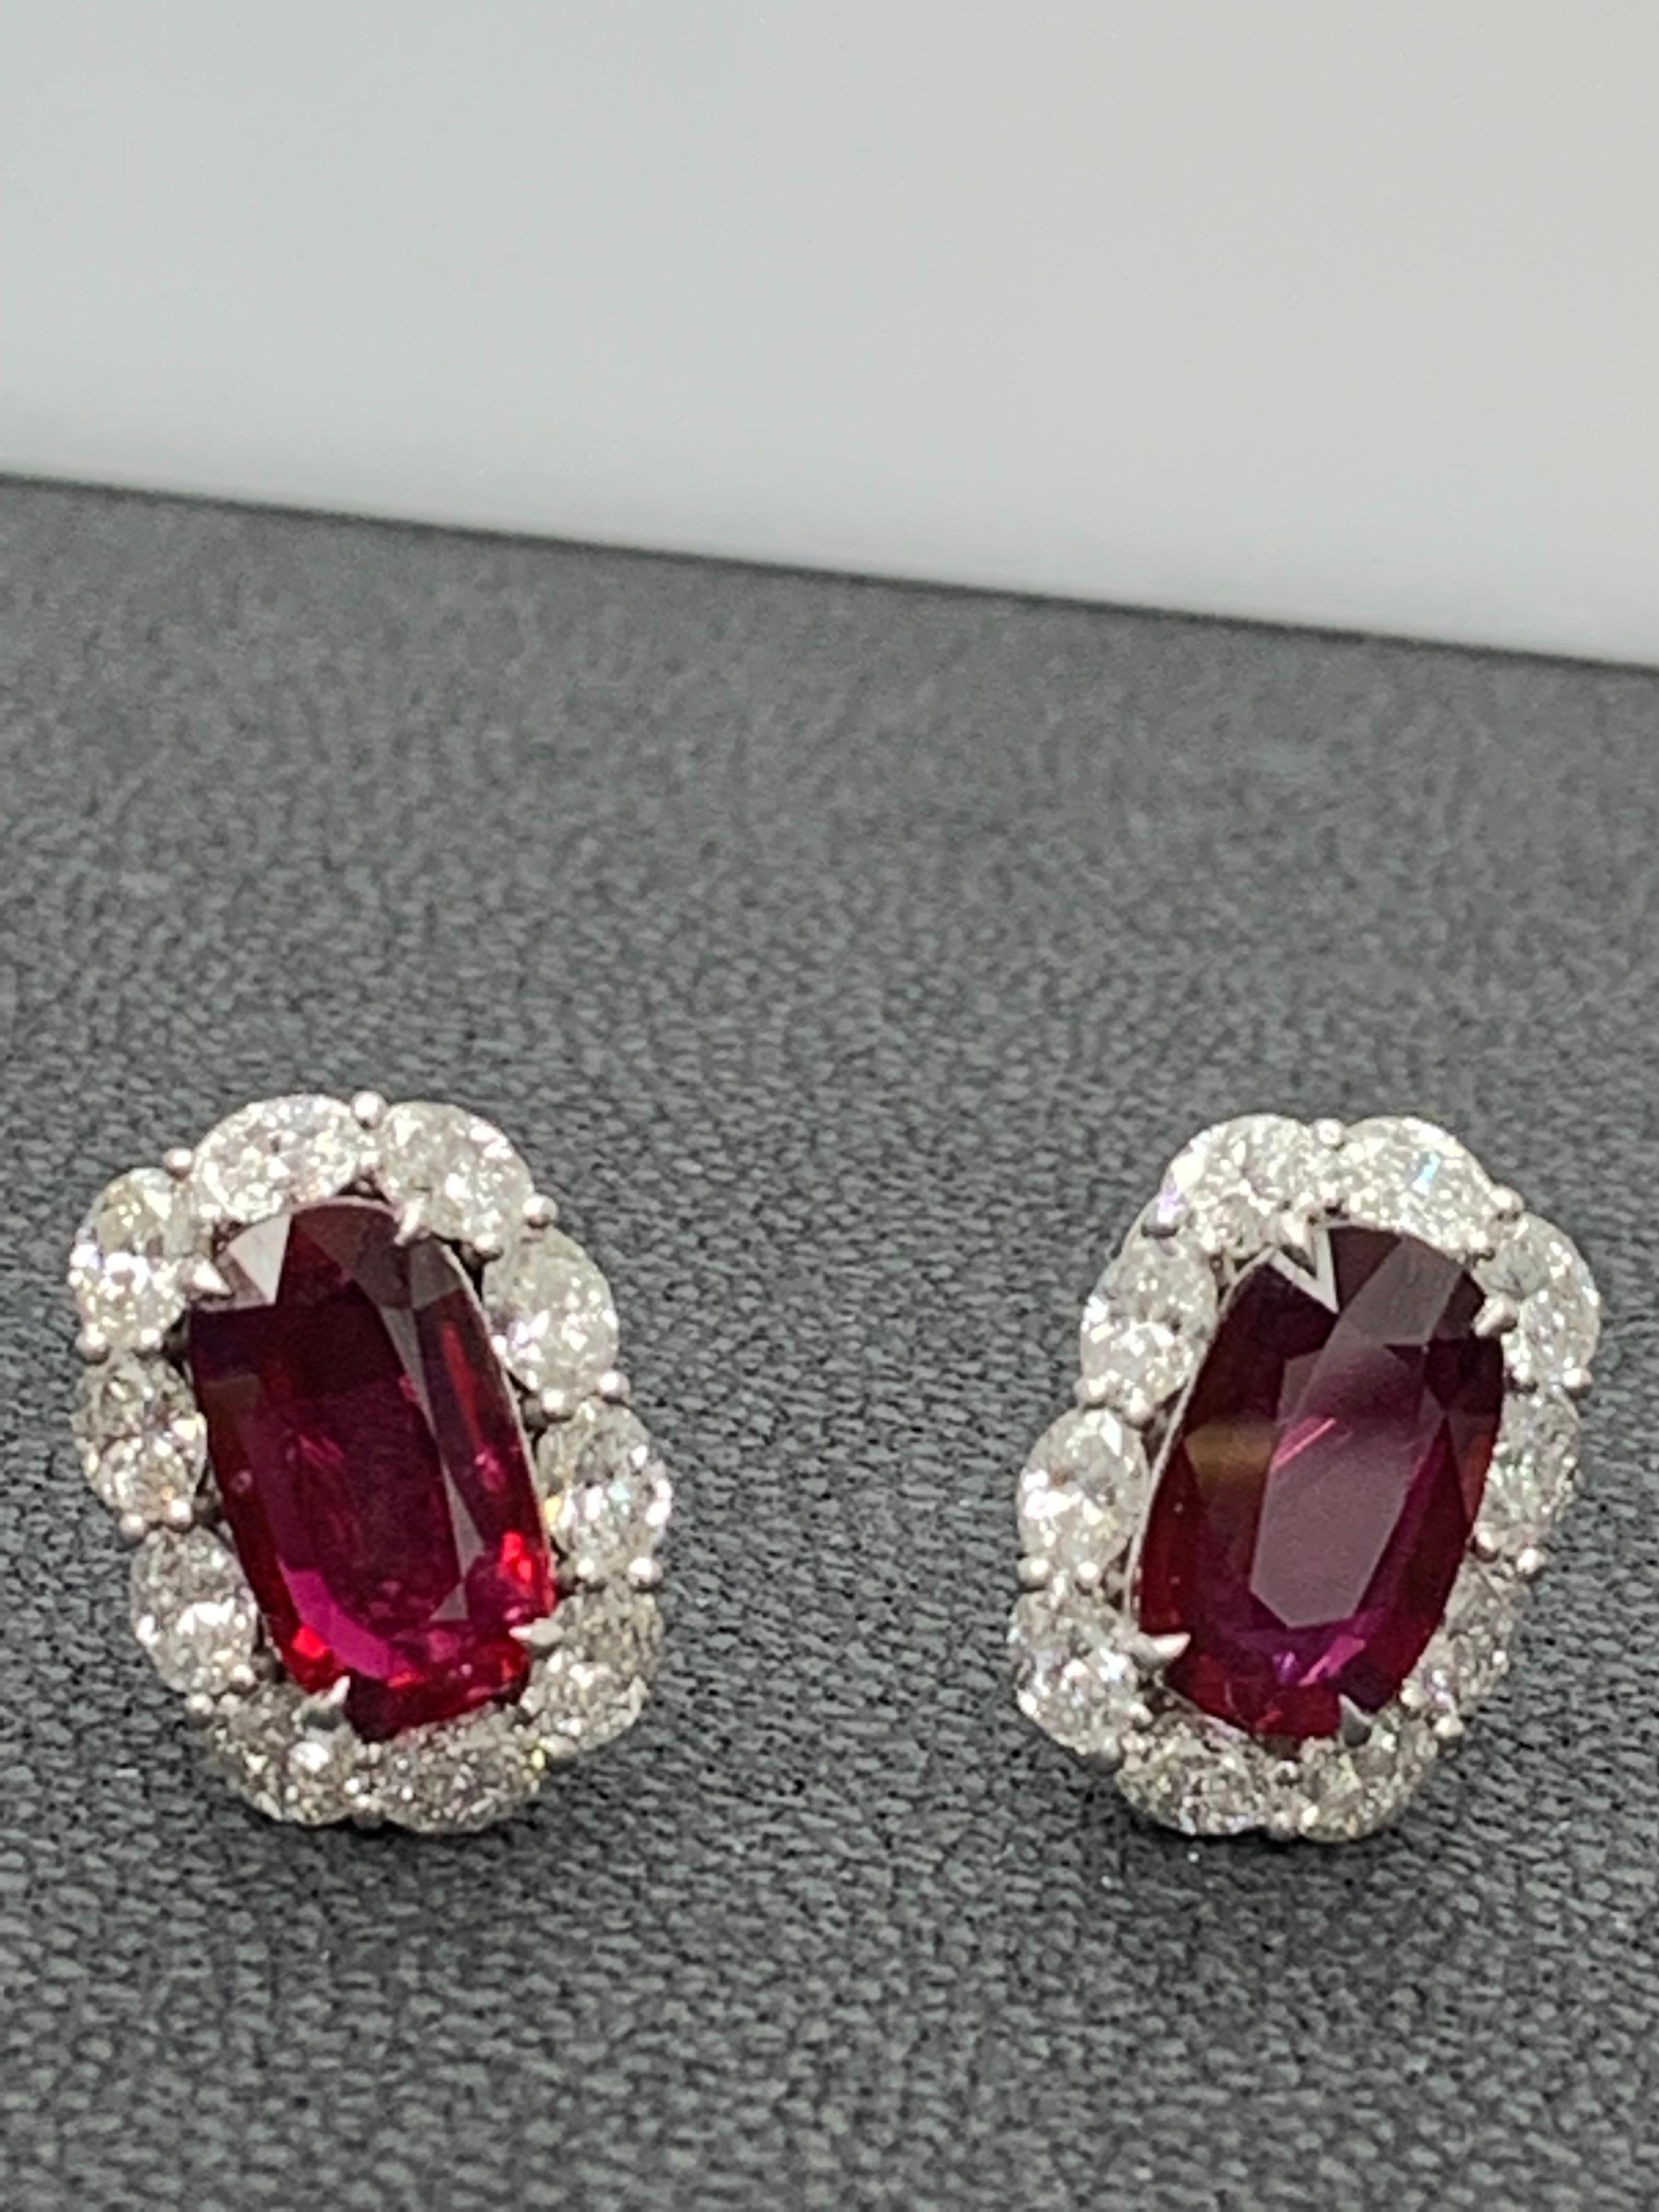 CERTIFIED 6.15 Carat Cushion Cut Ruby and Diamond Halo Earring in 18K White Gold For Sale 6